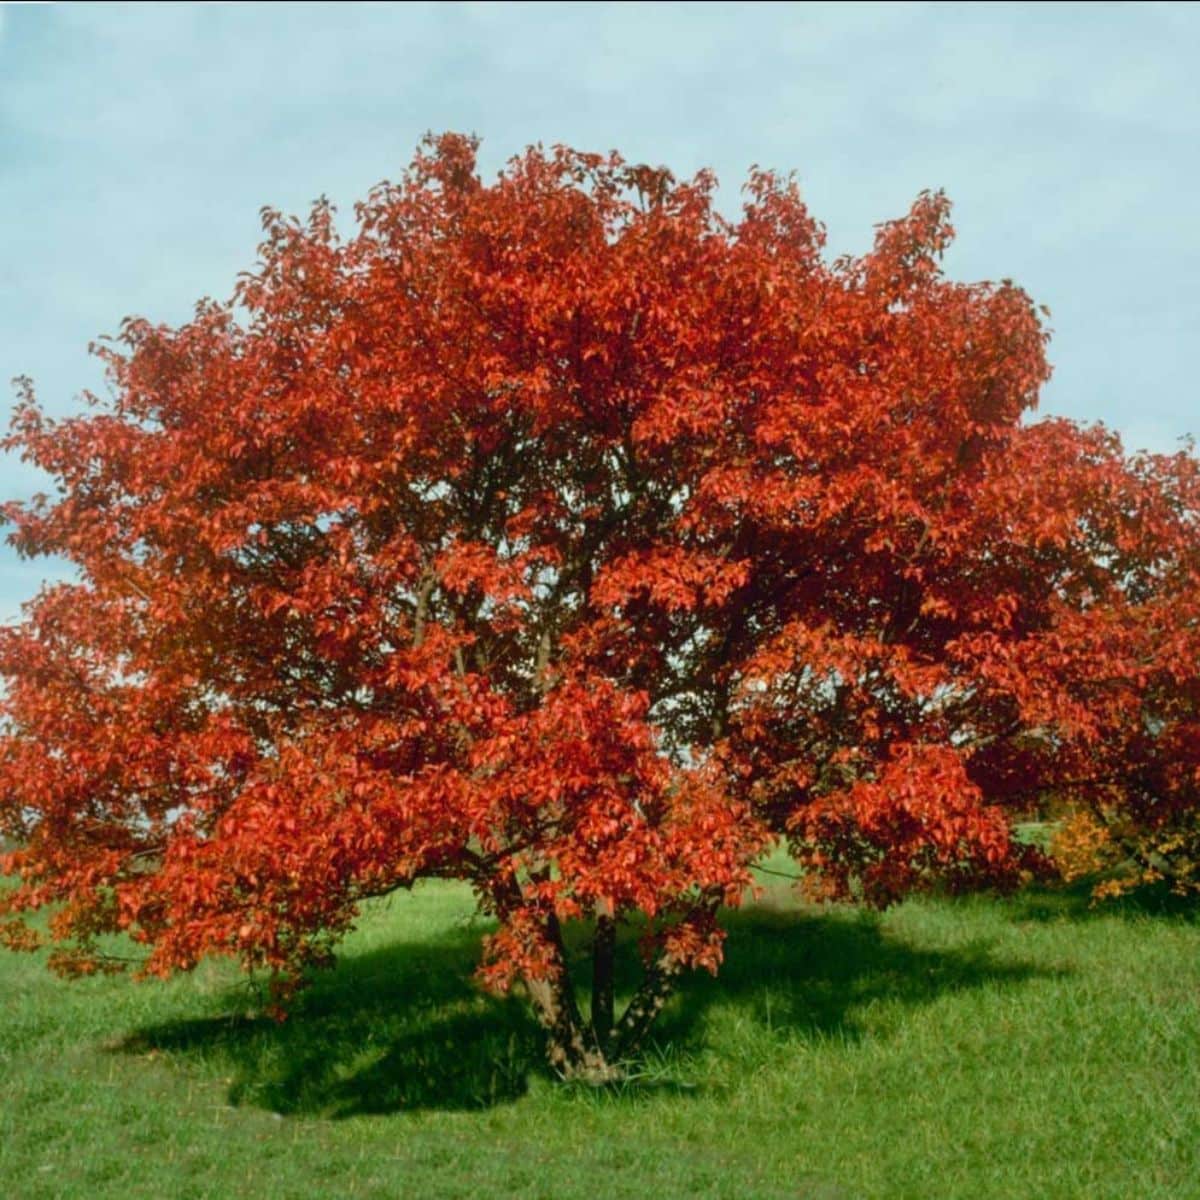 Flame Amur Maple in a park on a sunny day.